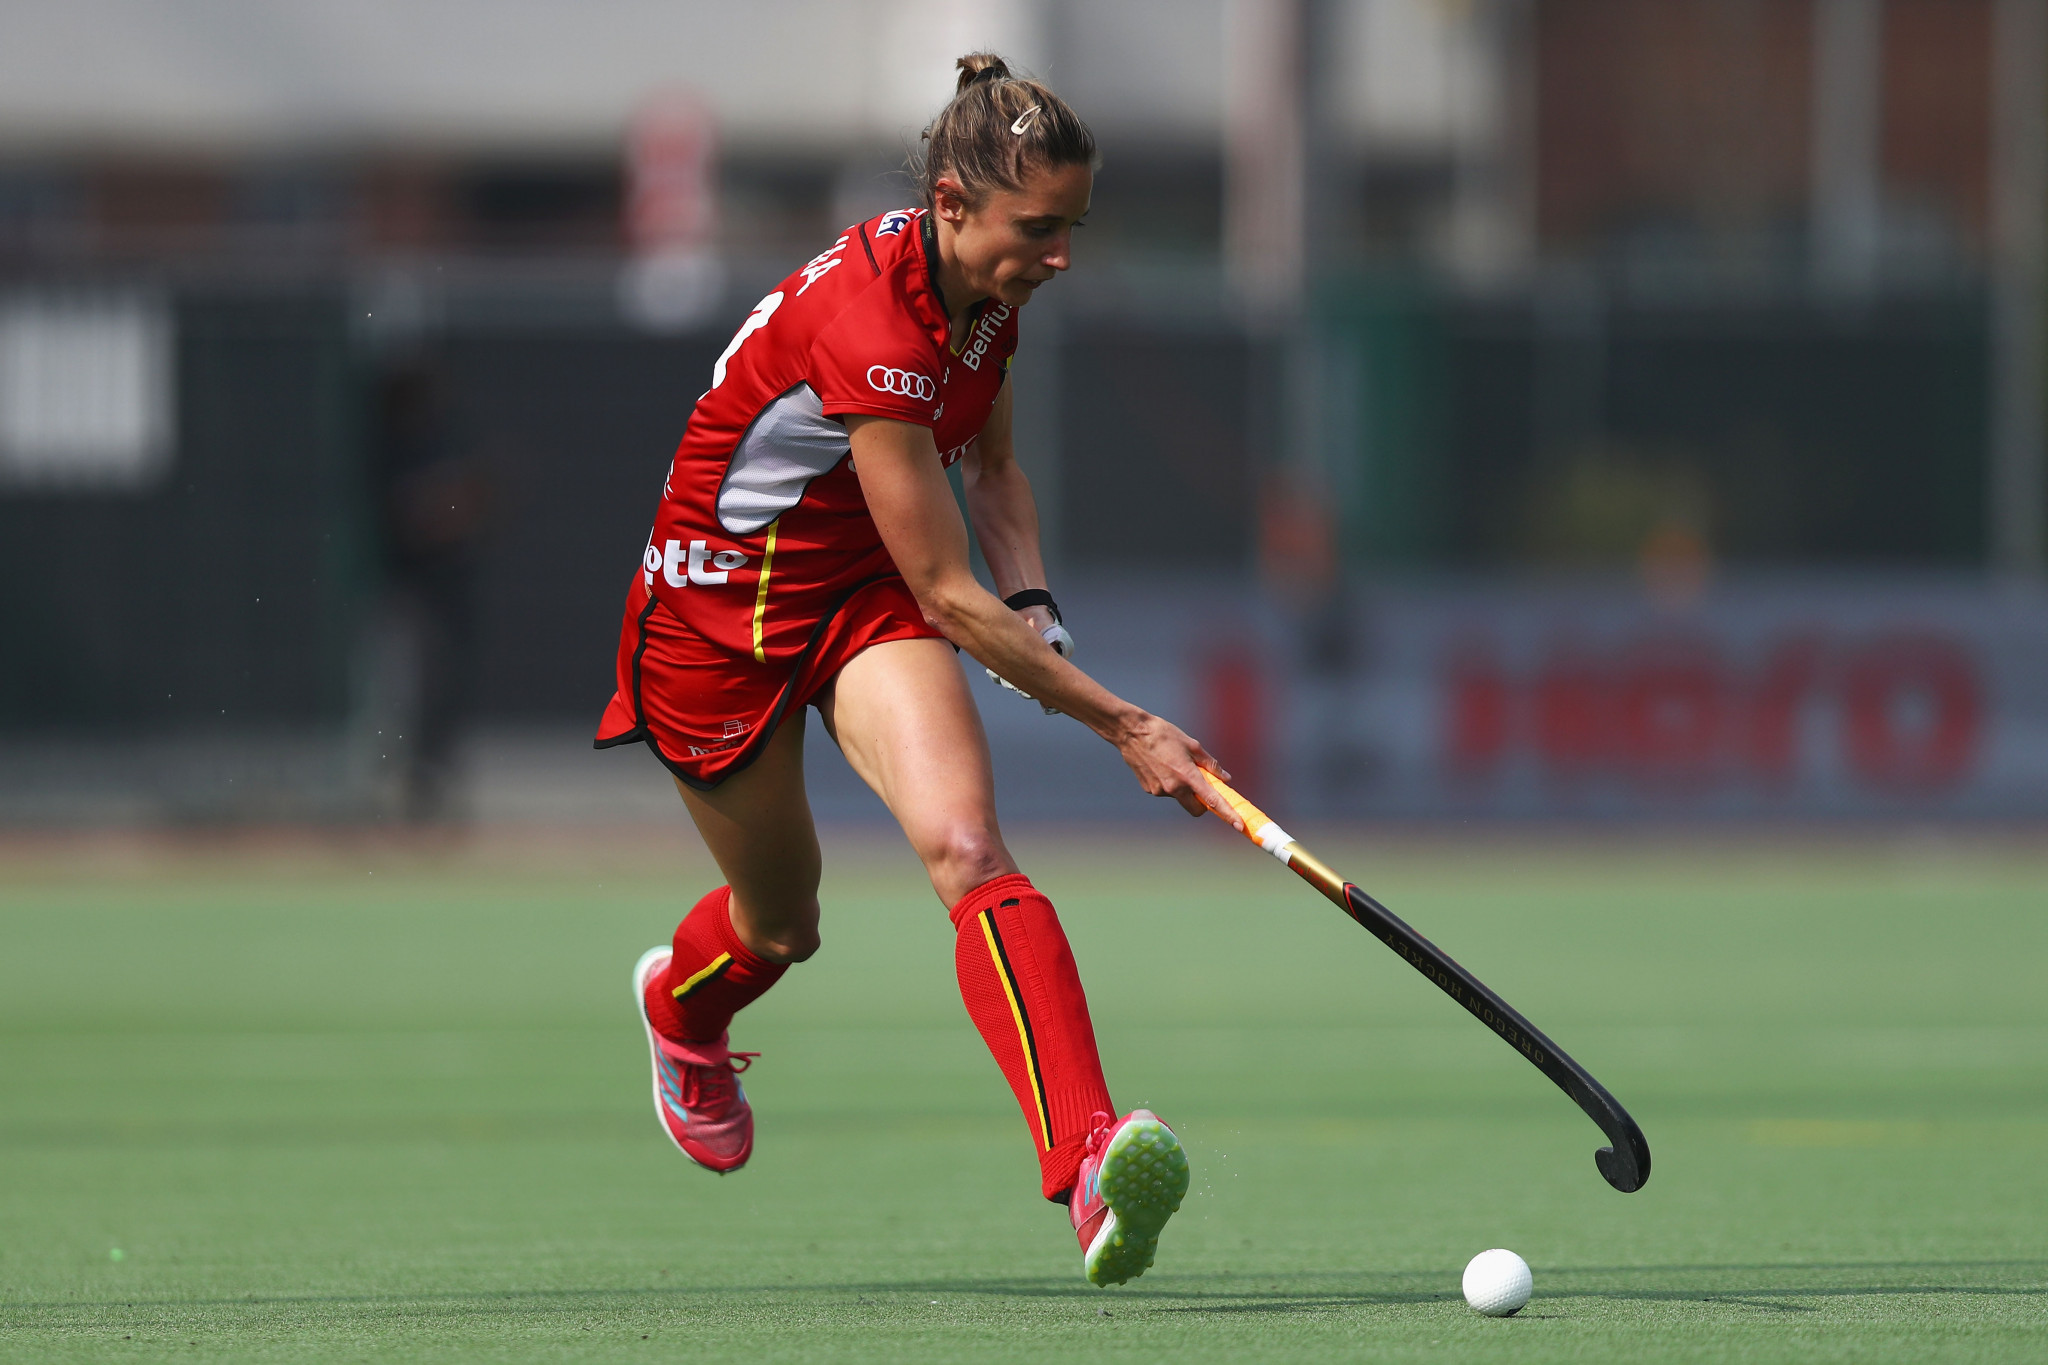 Emilie Sinia was on target for Belgium against China ©Getty Images